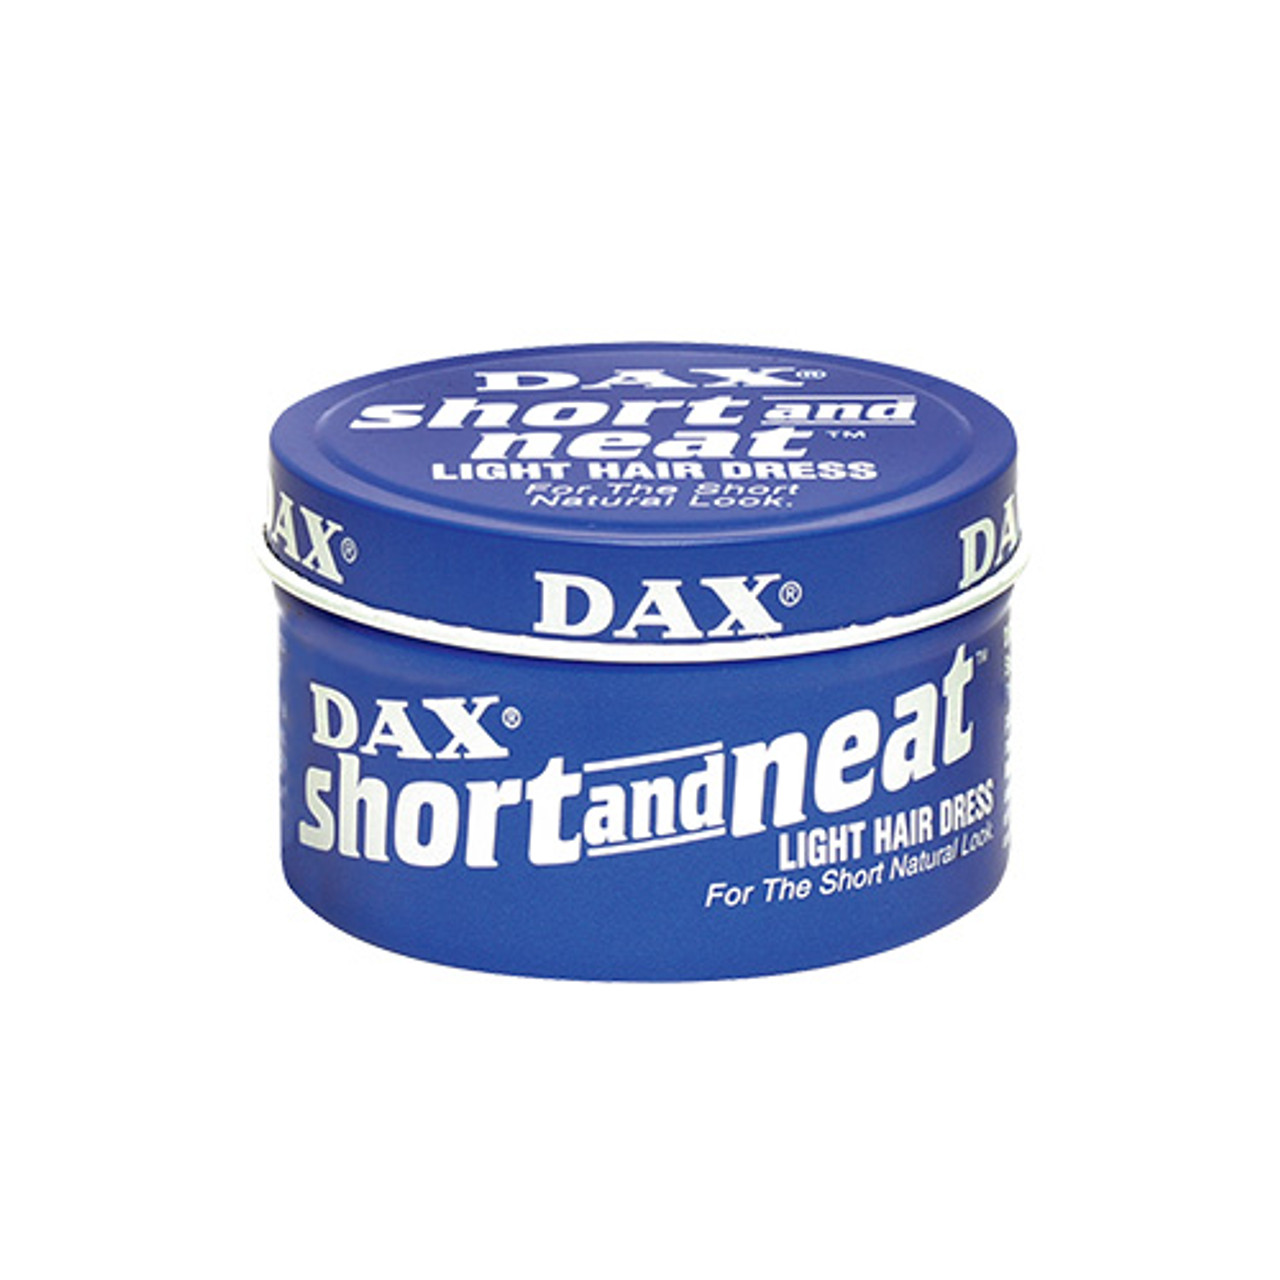 DAX Wave and Groom - Serious grease base hold 